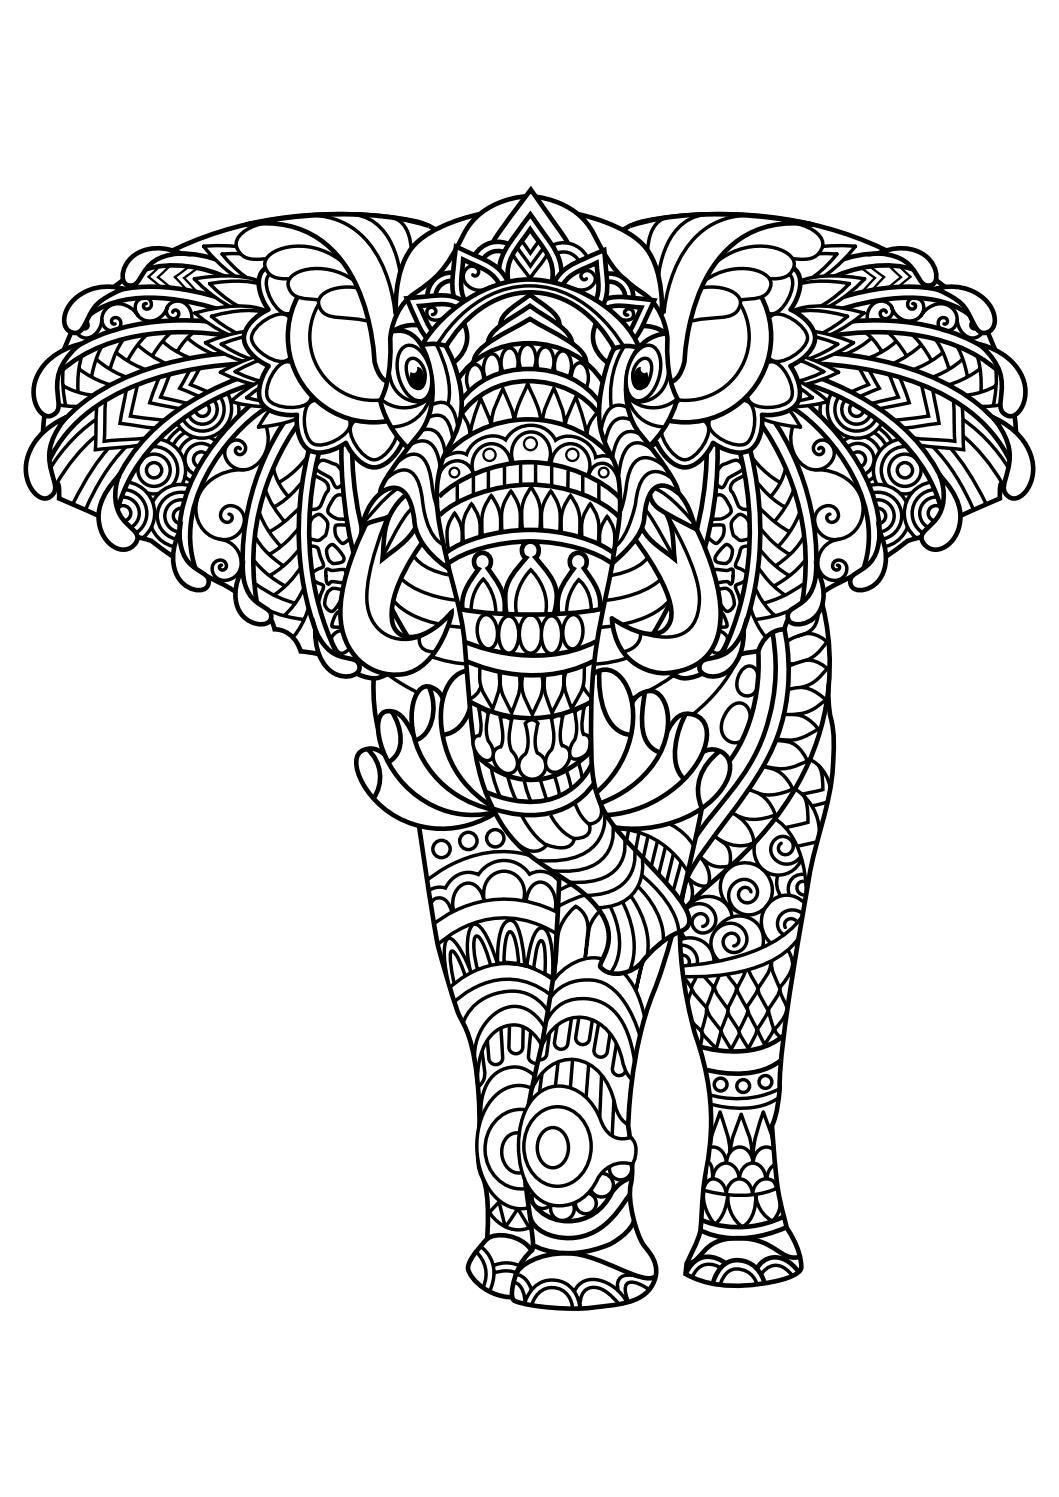 Animal Coloring Pages For Adults
 Animal coloring pages pdf